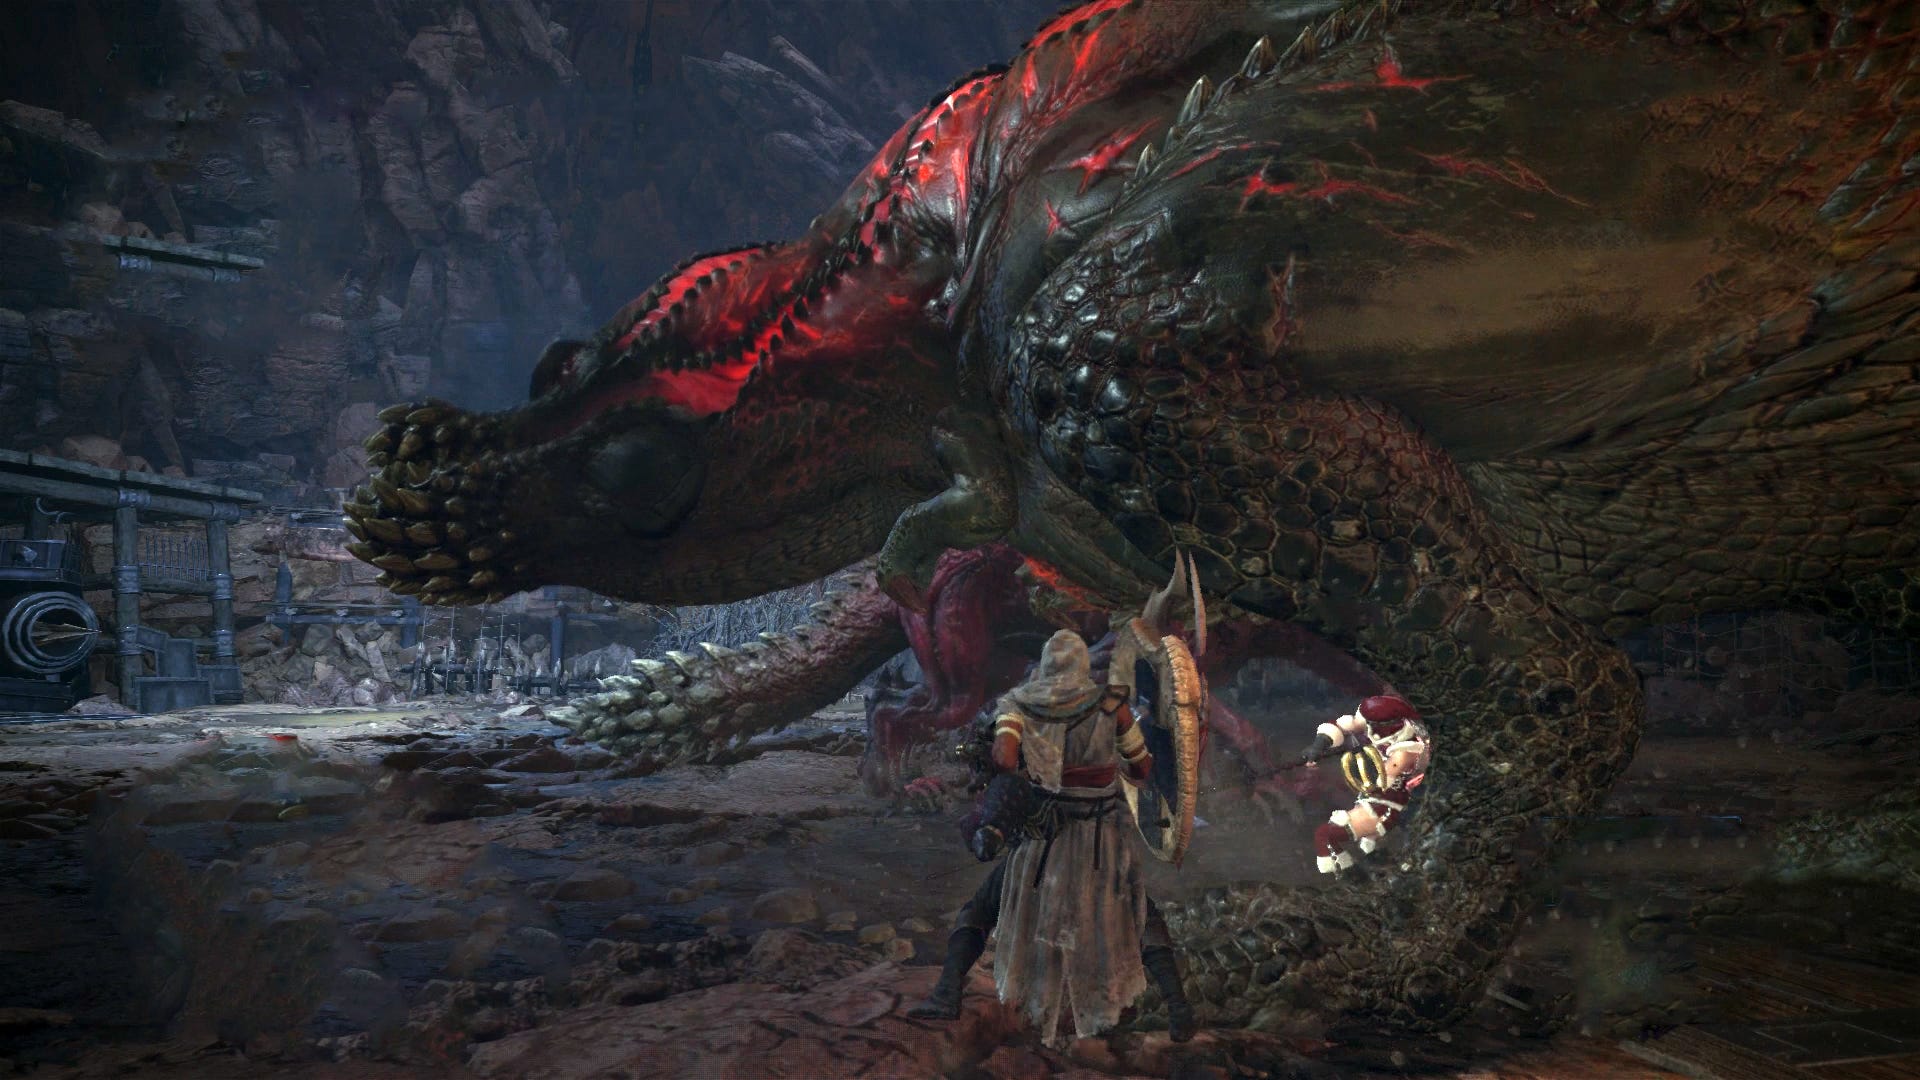 Mhw Silent Deadly And Fierce Event Quest Tips Technobubble